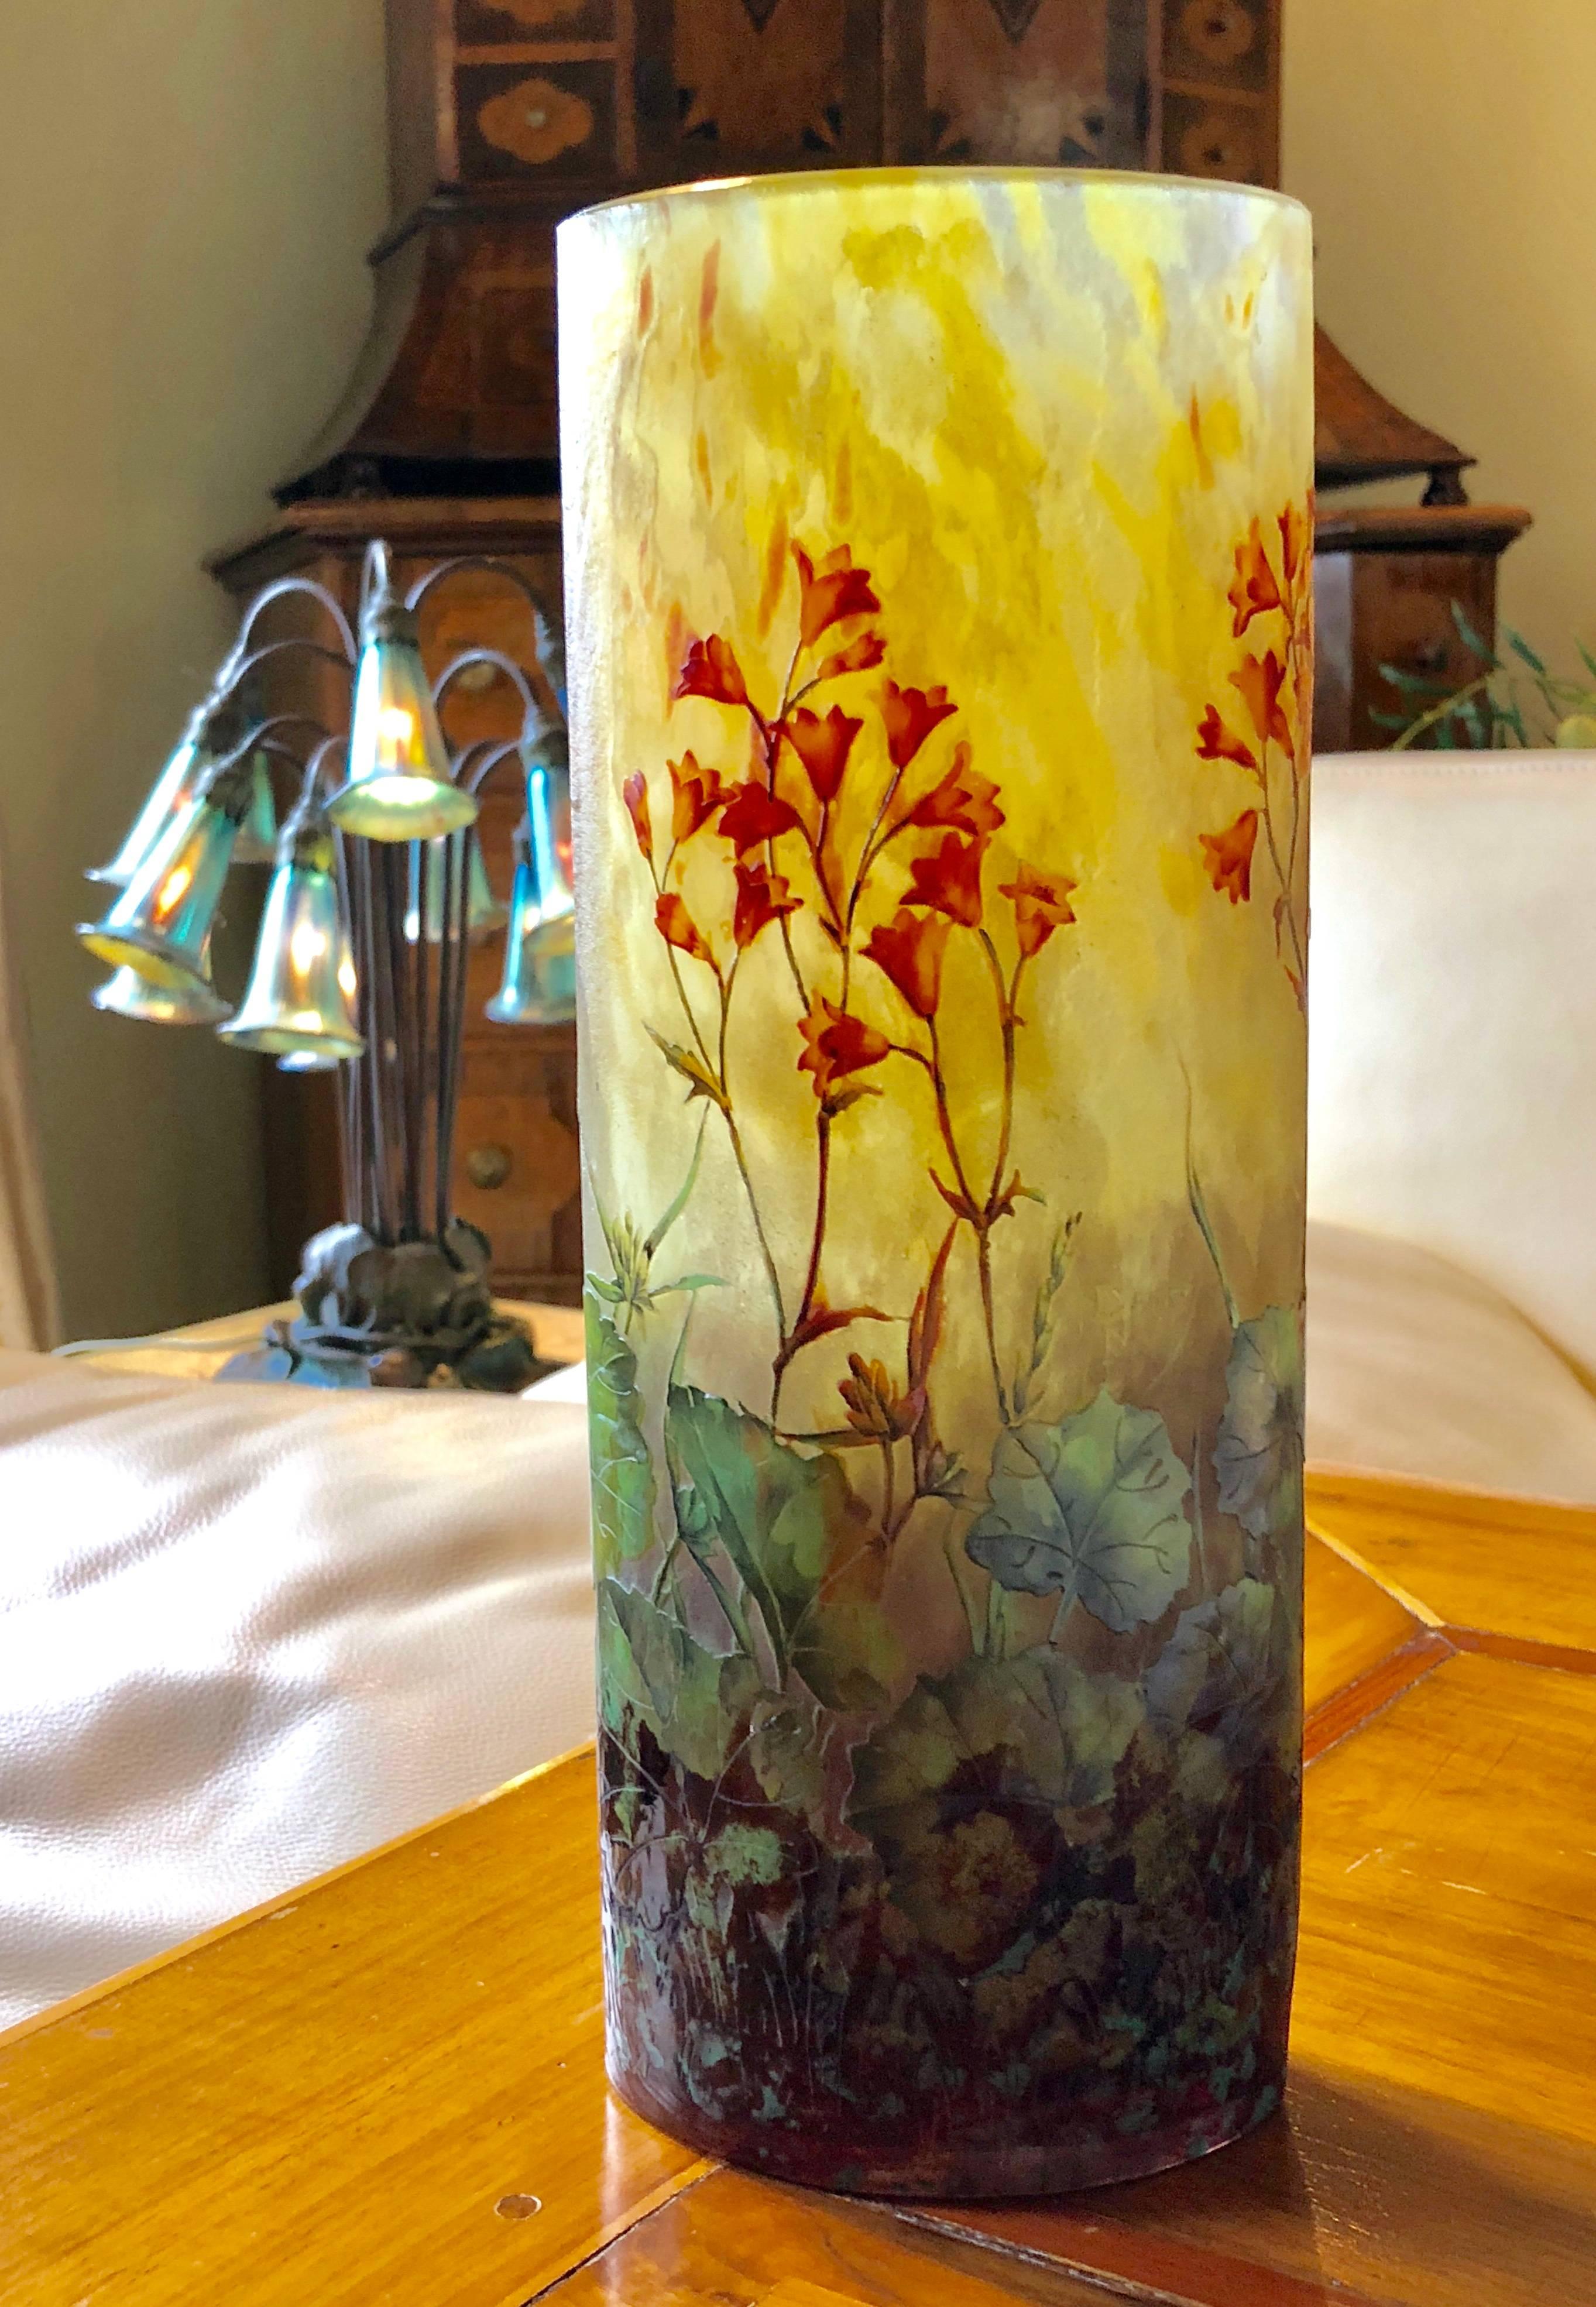 A French Art Nouveau enameled and etched glass vase by Daum, circa 1910.
It is a fine example of the intricate multi layers of colored glass ranging from deep Amethyst on the base to a bright canary yellow on top. The signature is etched in relief